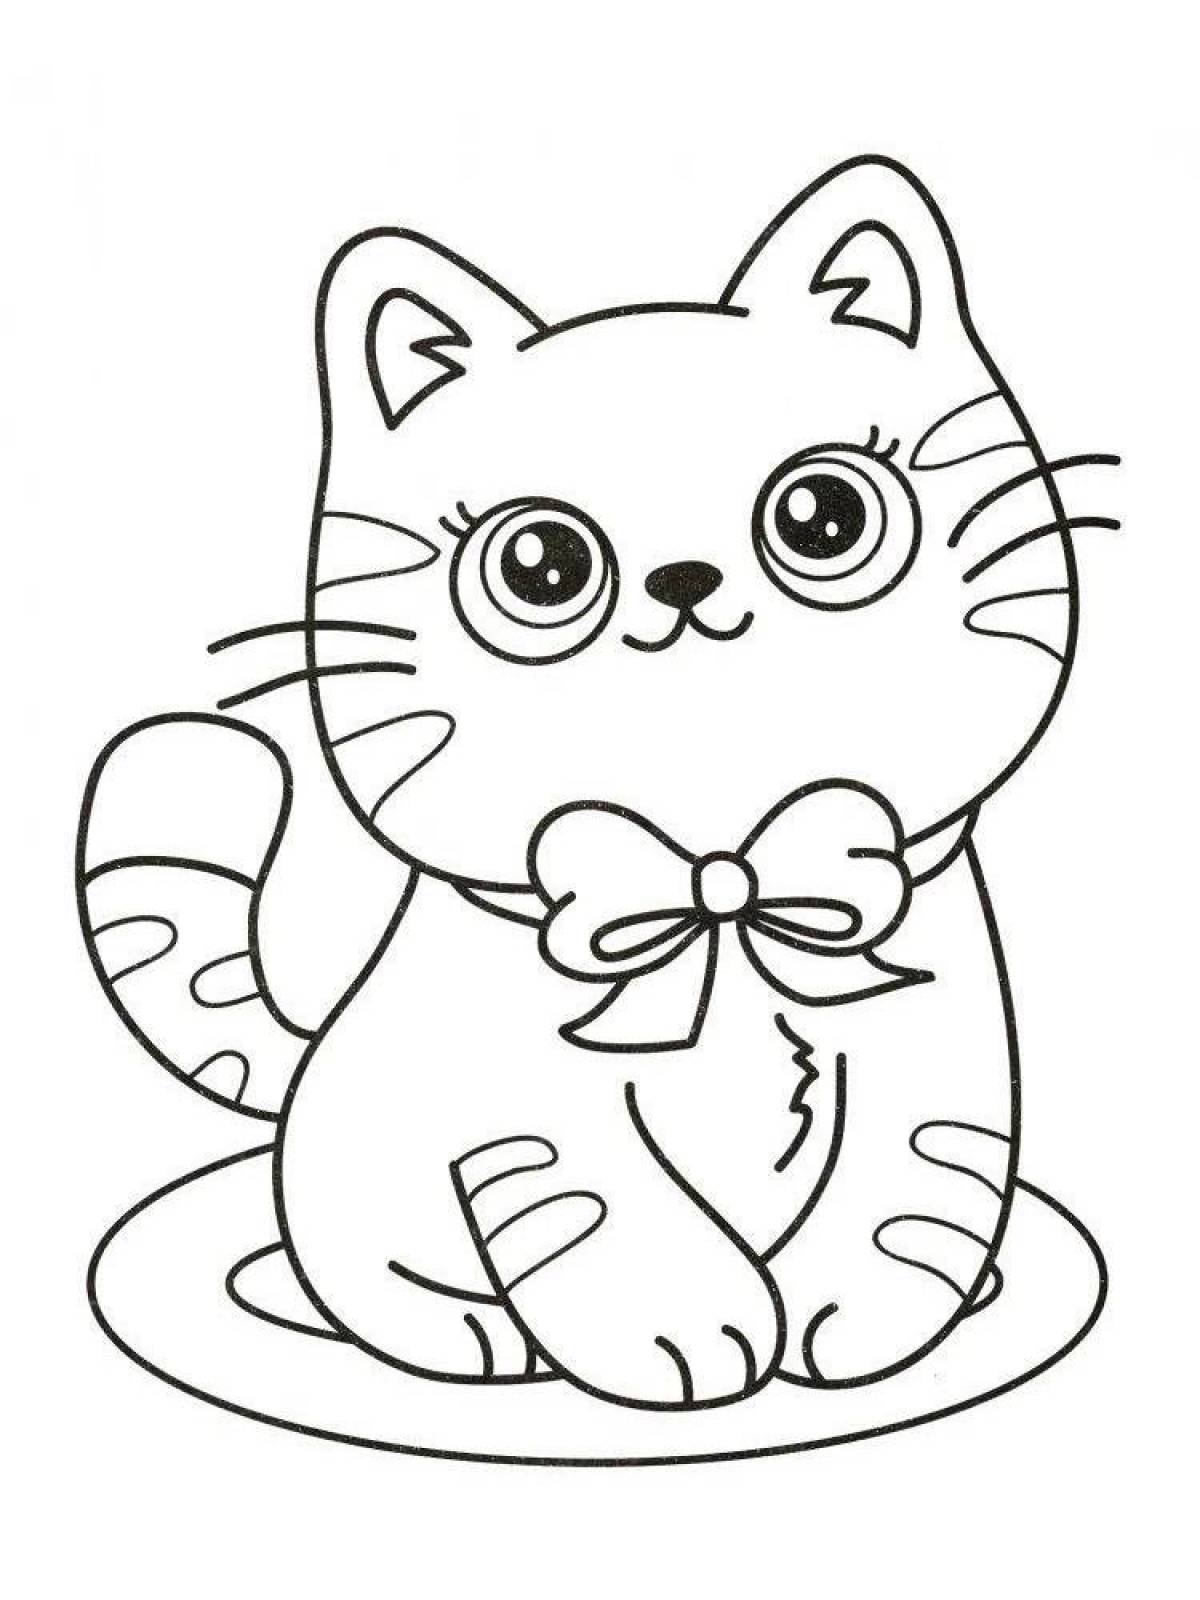 Coloring book inquisitive kitten for kids